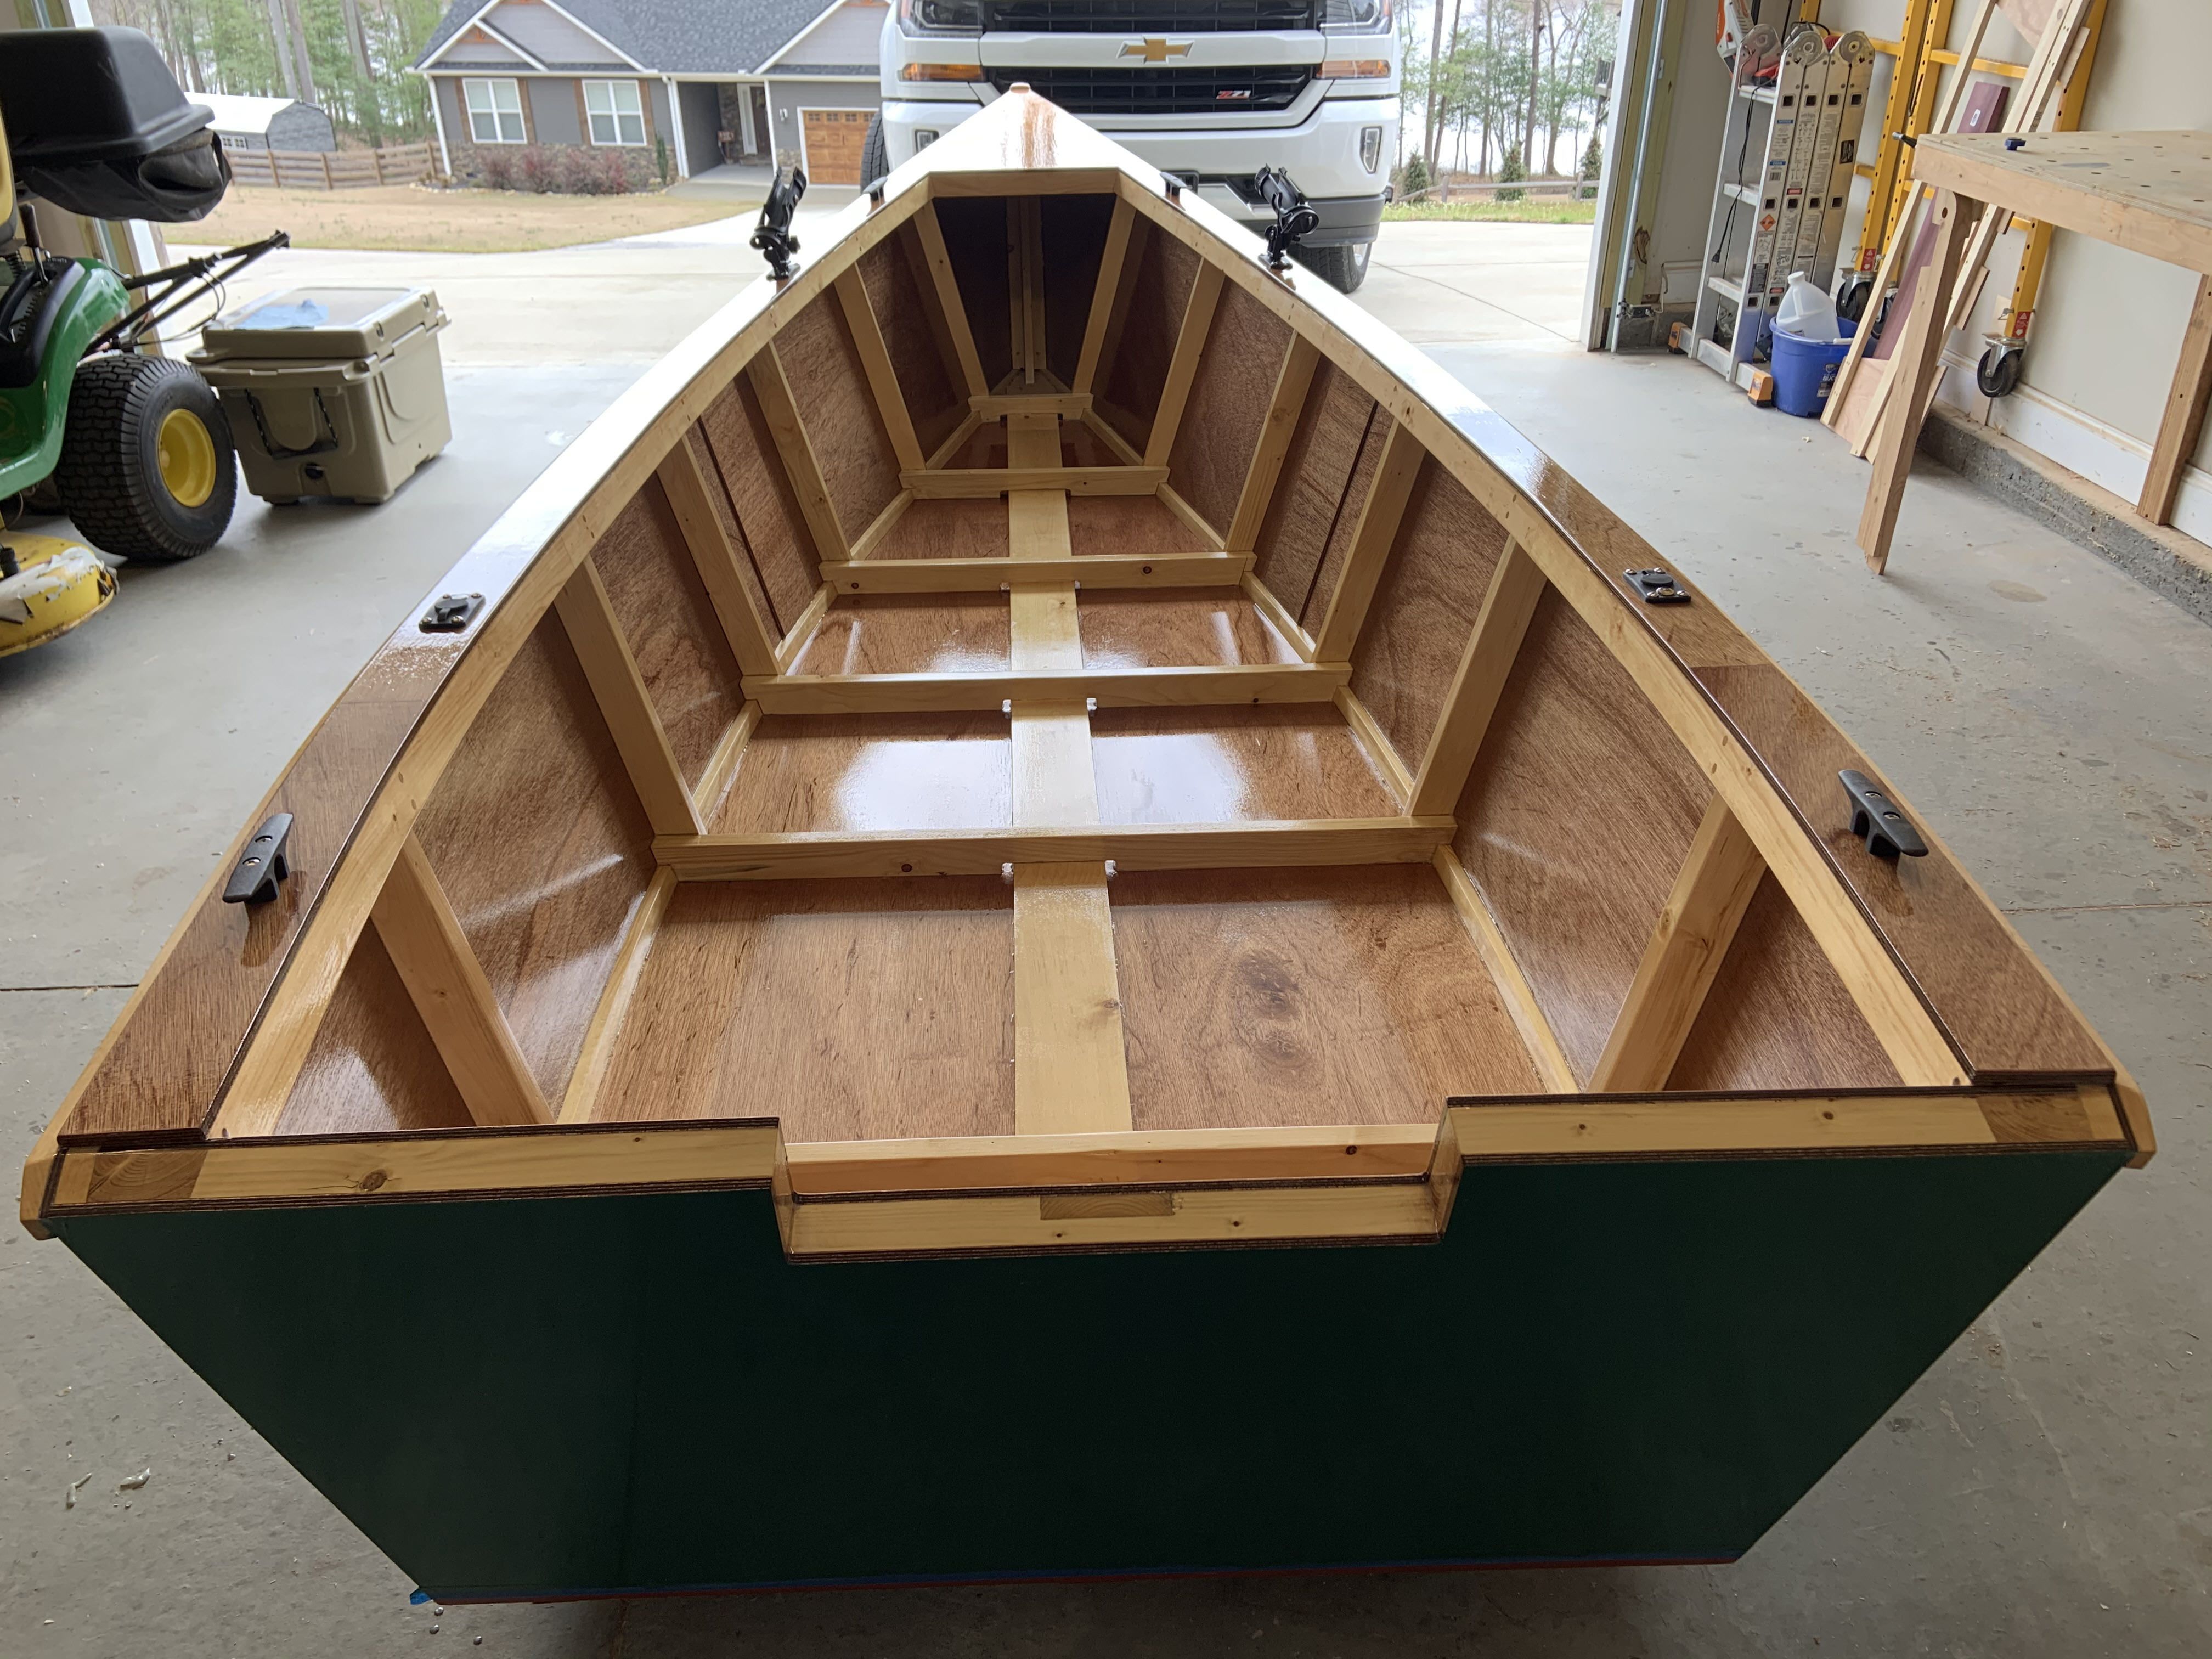 How To Build Wooden Boats